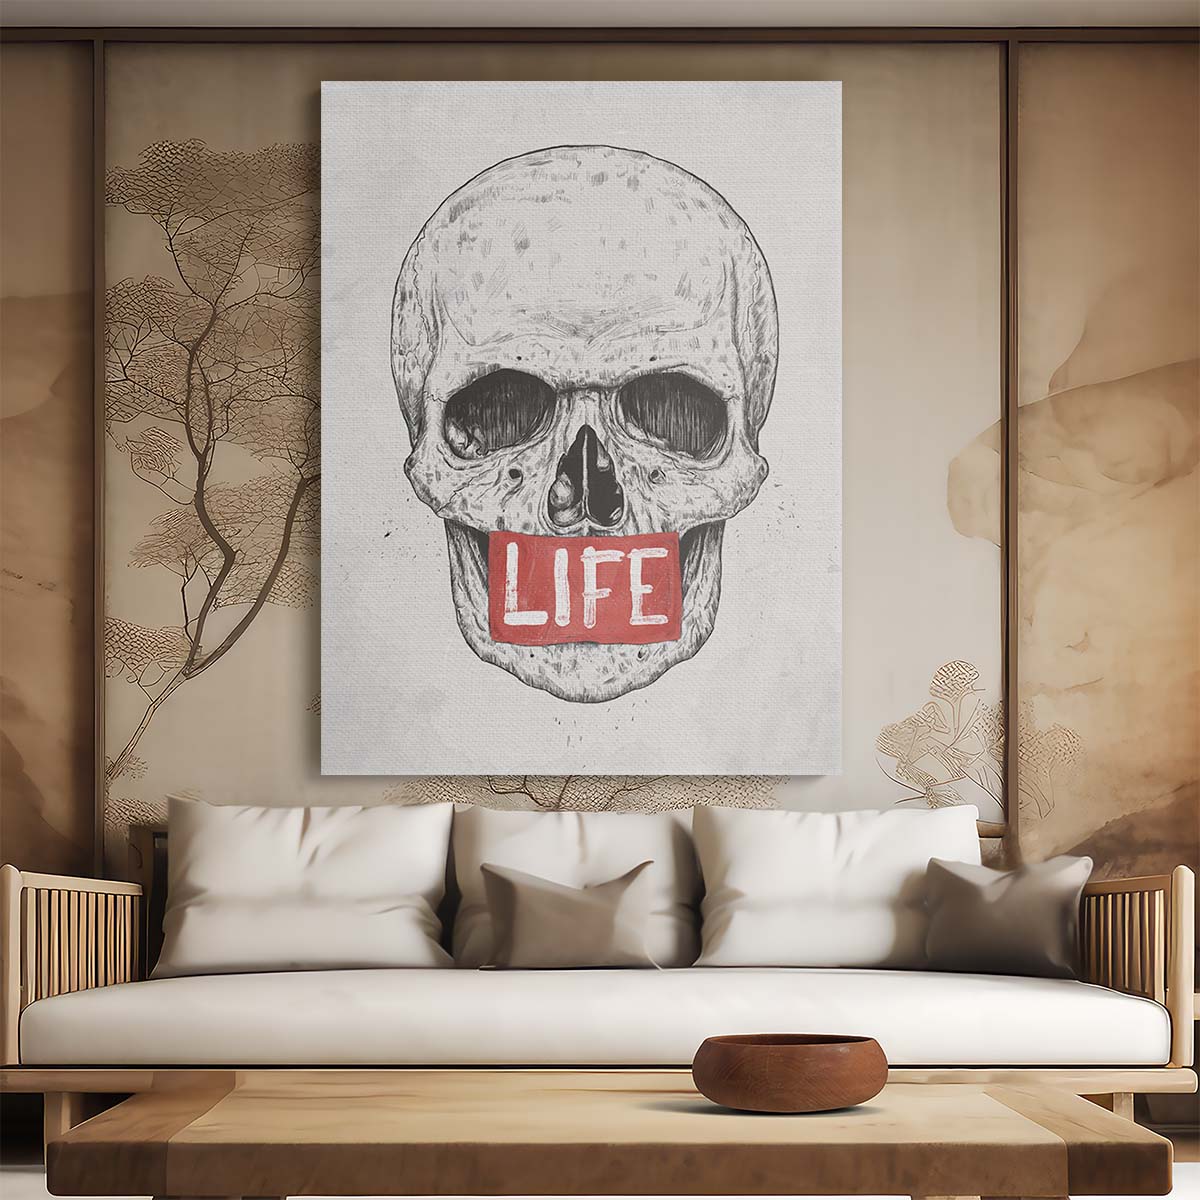 Spooky Skull Illustration Drawing with Motivational Quote, Halloween Wall Art by Luxuriance Designs, made in USA